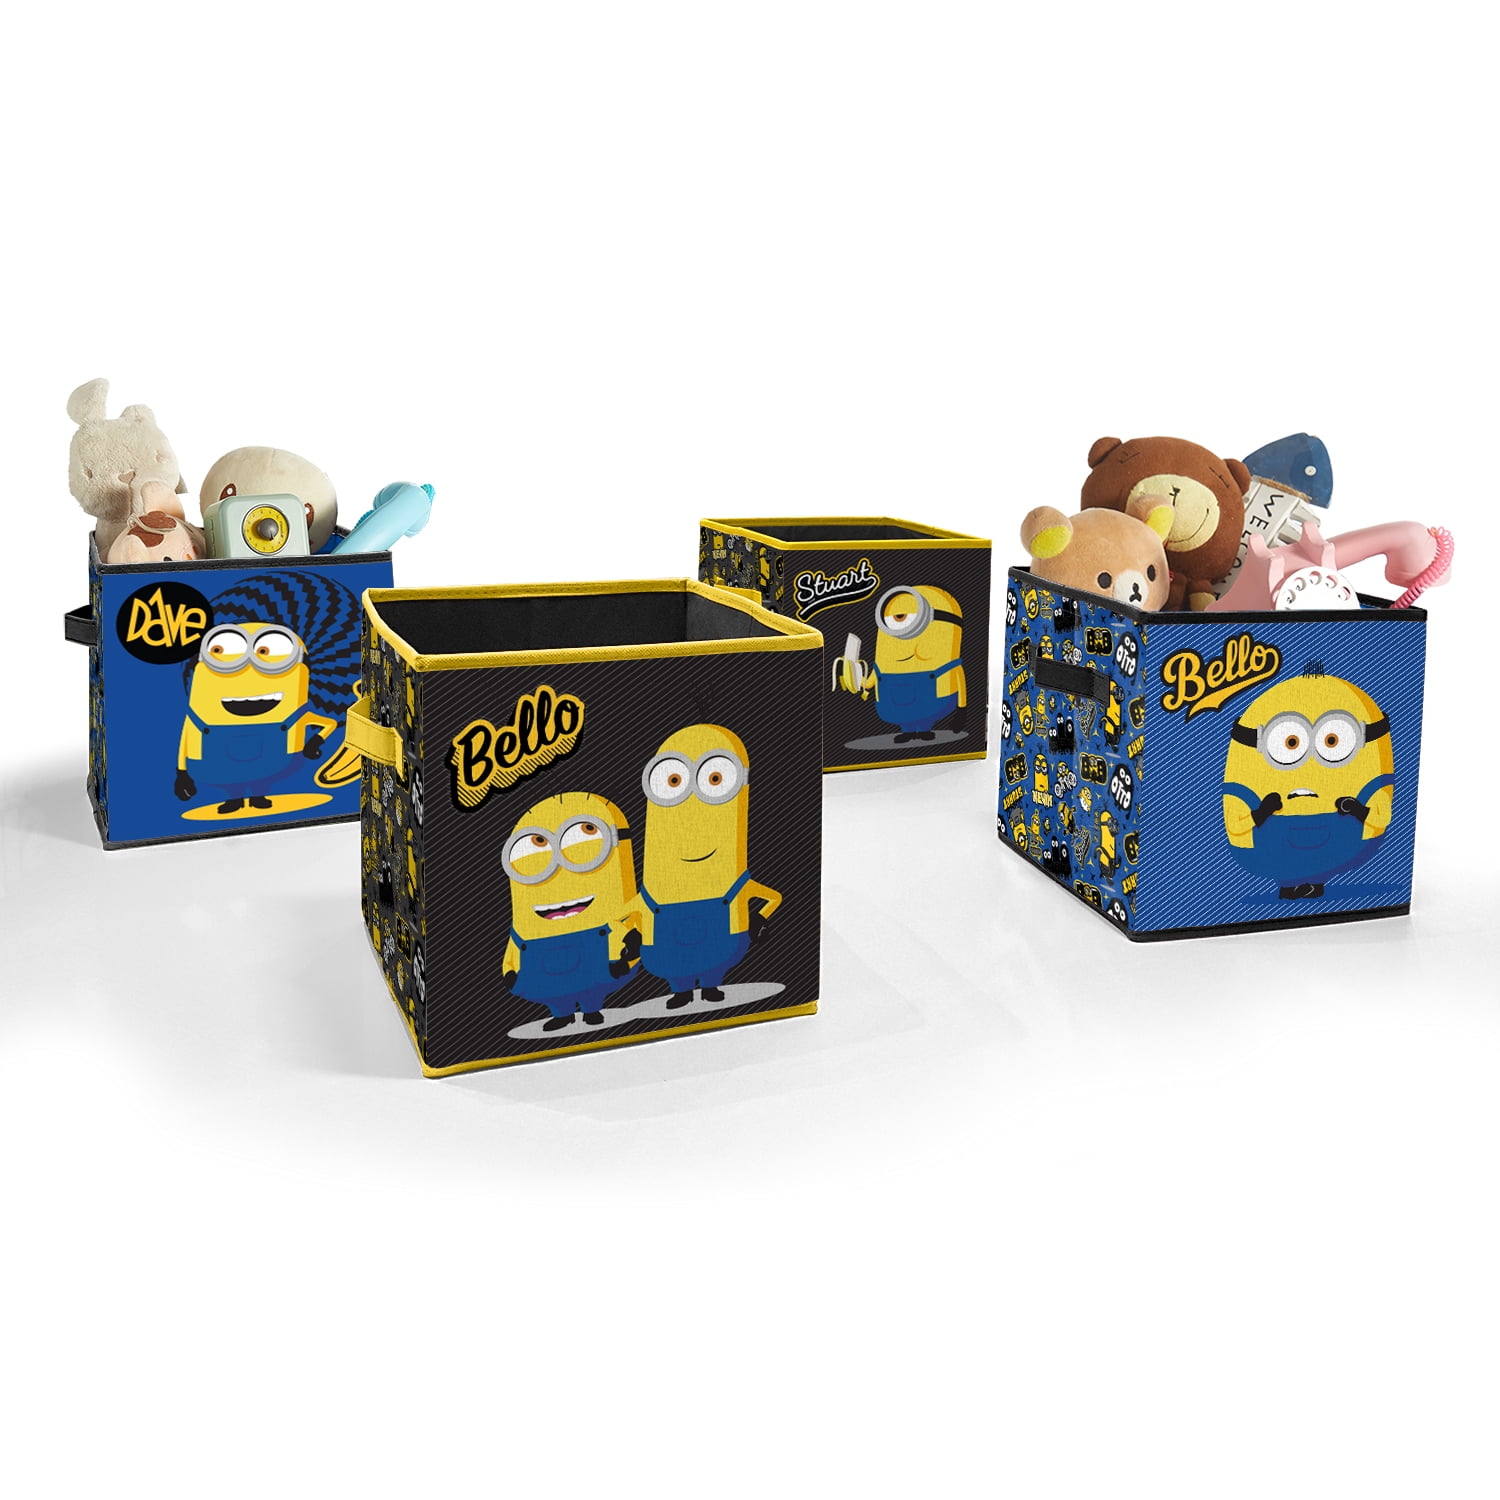 Details about   Universal Minions 2 Collapsible Toy Storage Trunk 